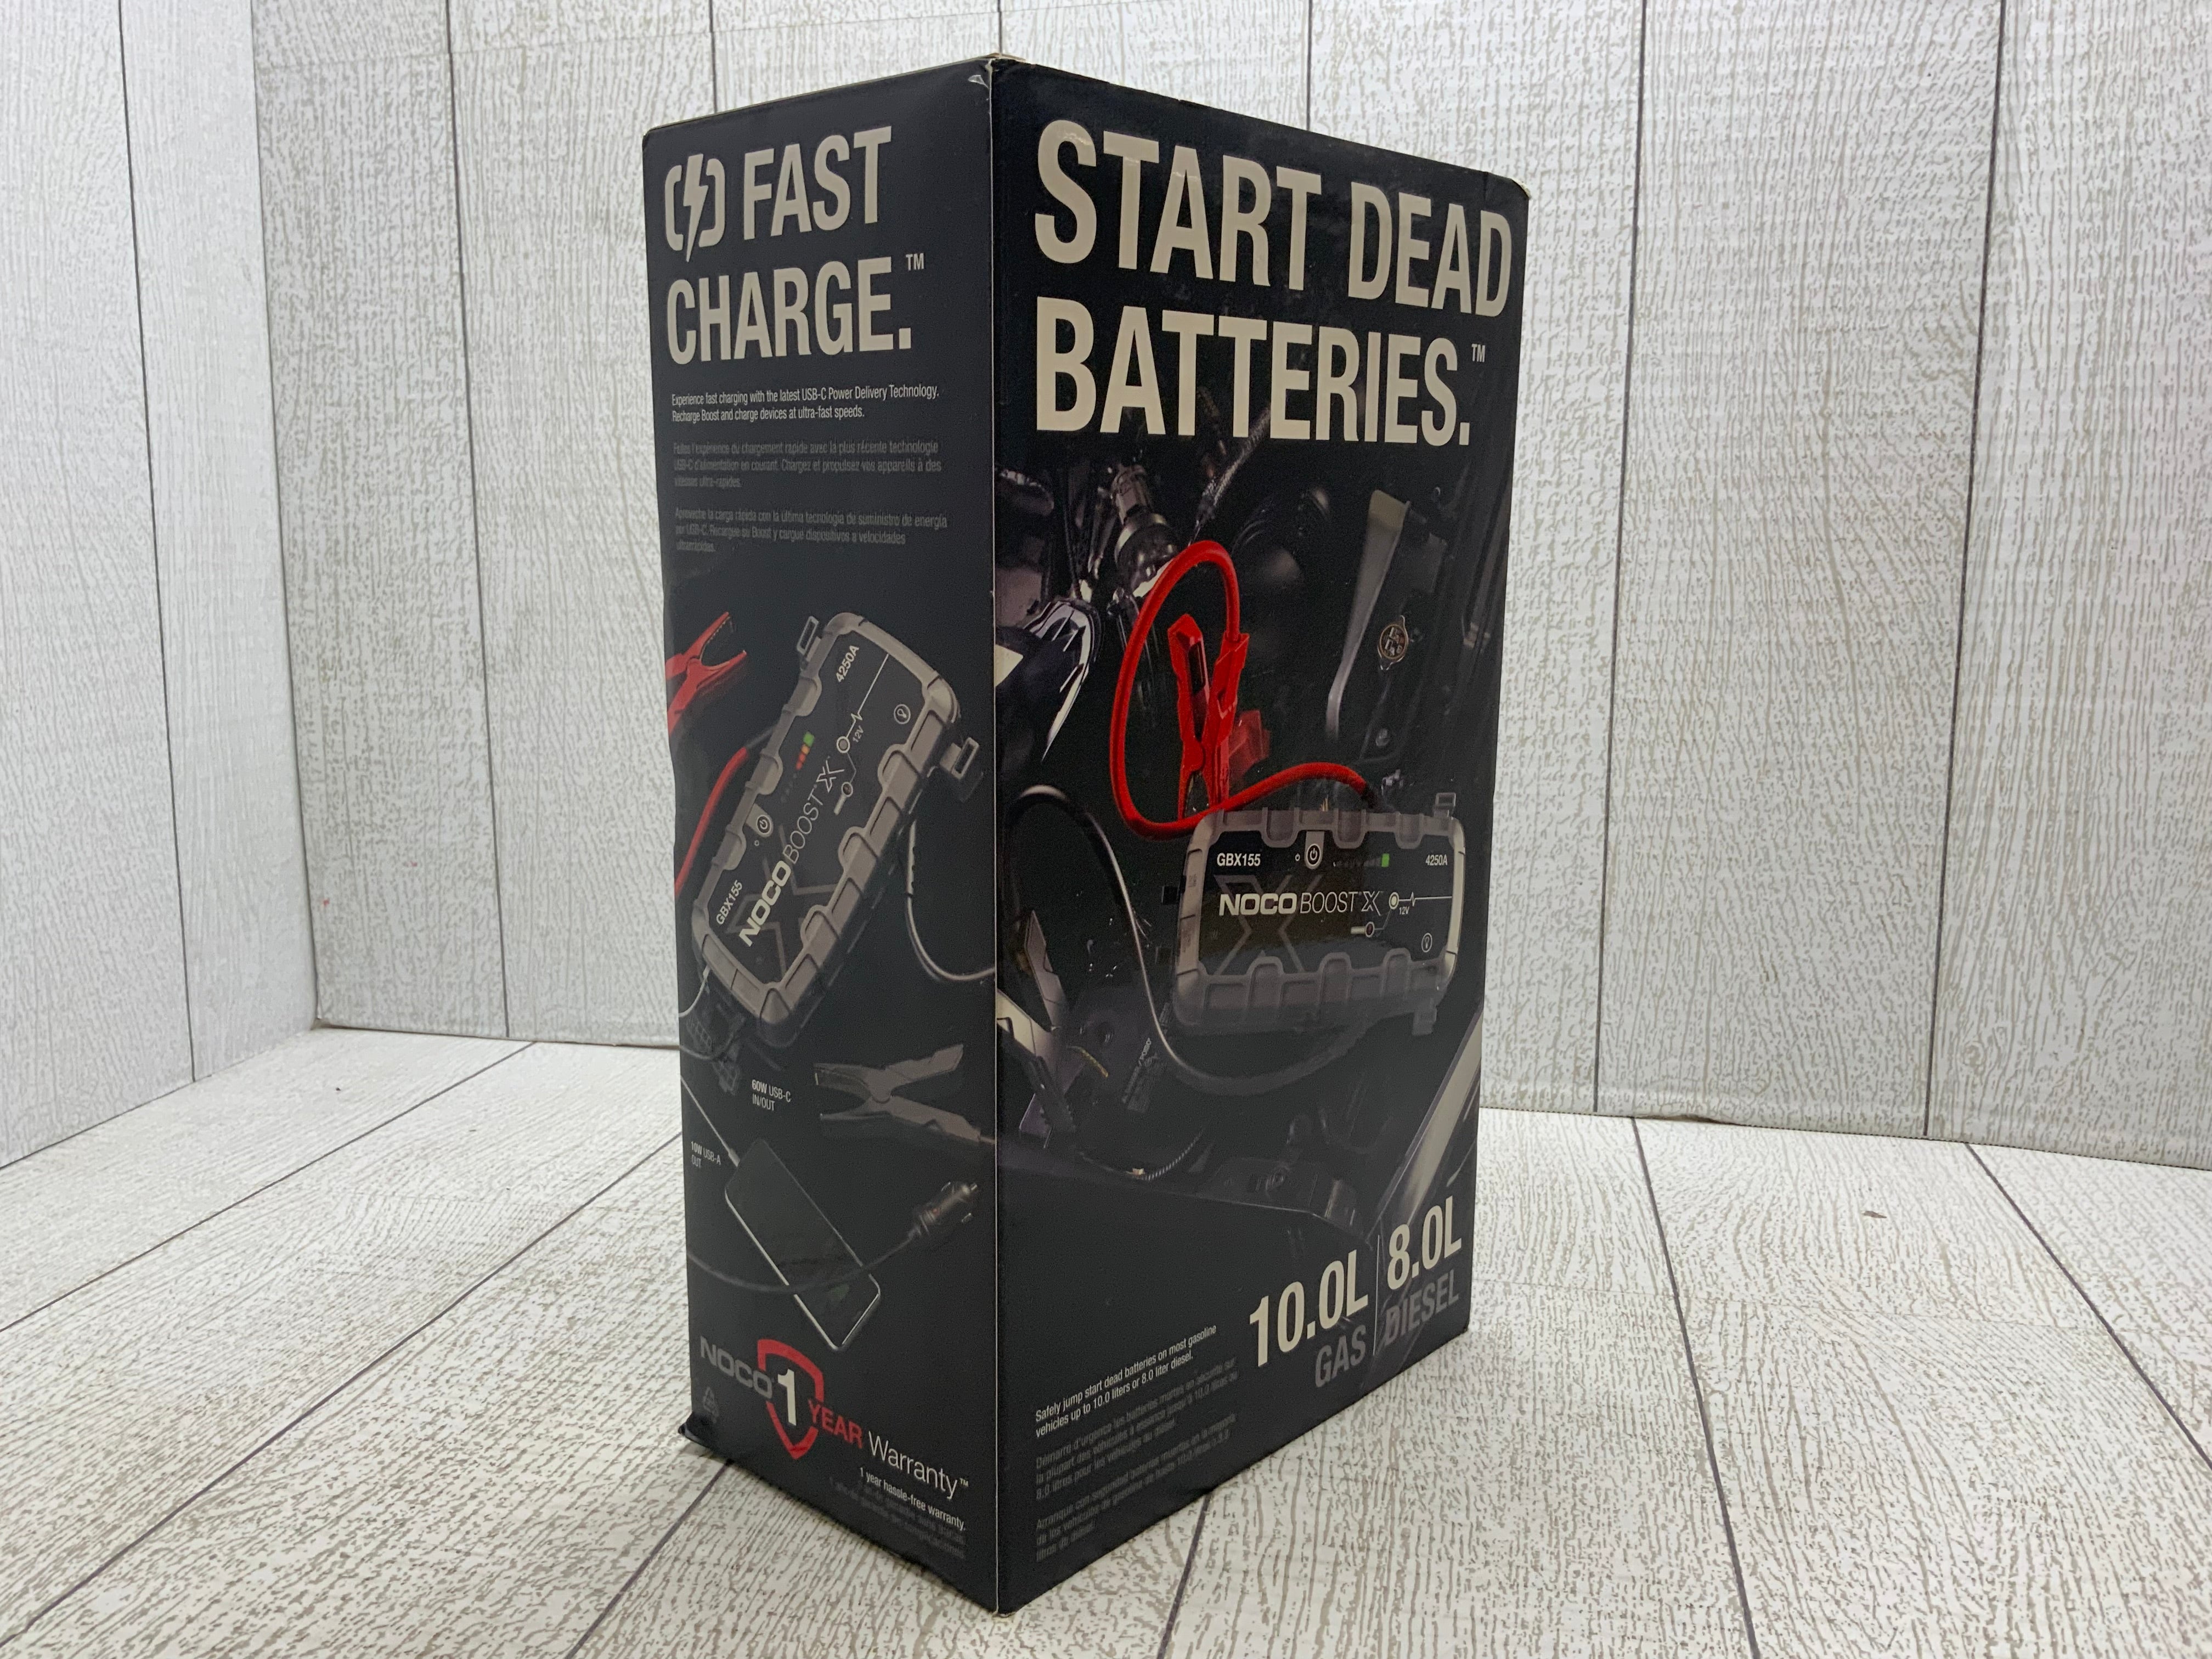 NOCO Boost X GBX155 4250A 12V Portable Lithium Jump Starter **FOR PARTS** (8045385973998)